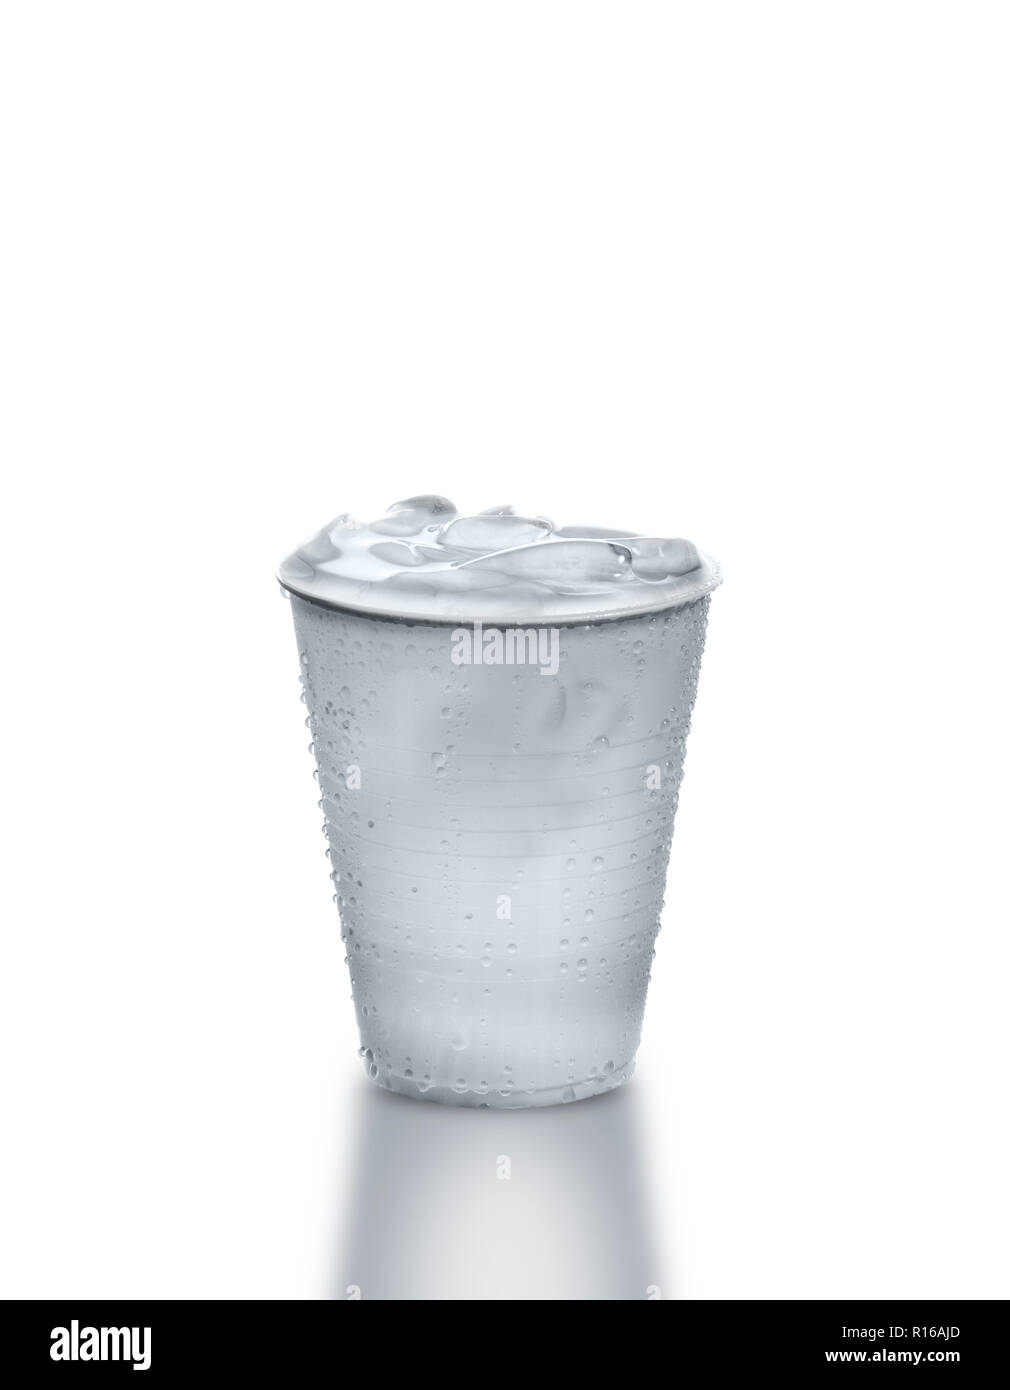 Plastic cup full of iced water against white background Stock Photo